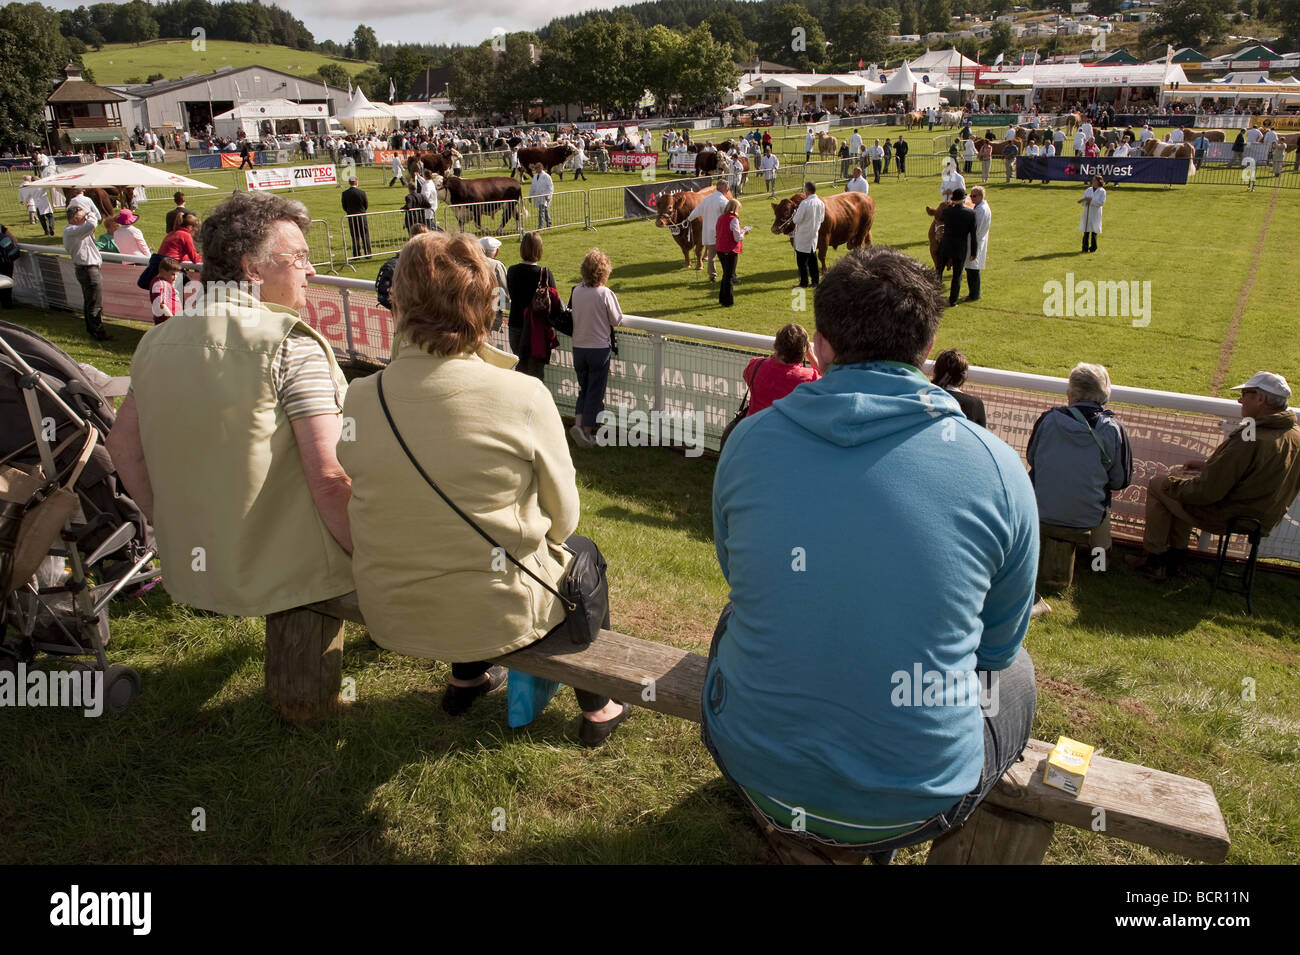 Spectators sit in the sunshine watching the cattle judging competition at the Royal Welsh Agricultural Show outdoor event. Stock Photo